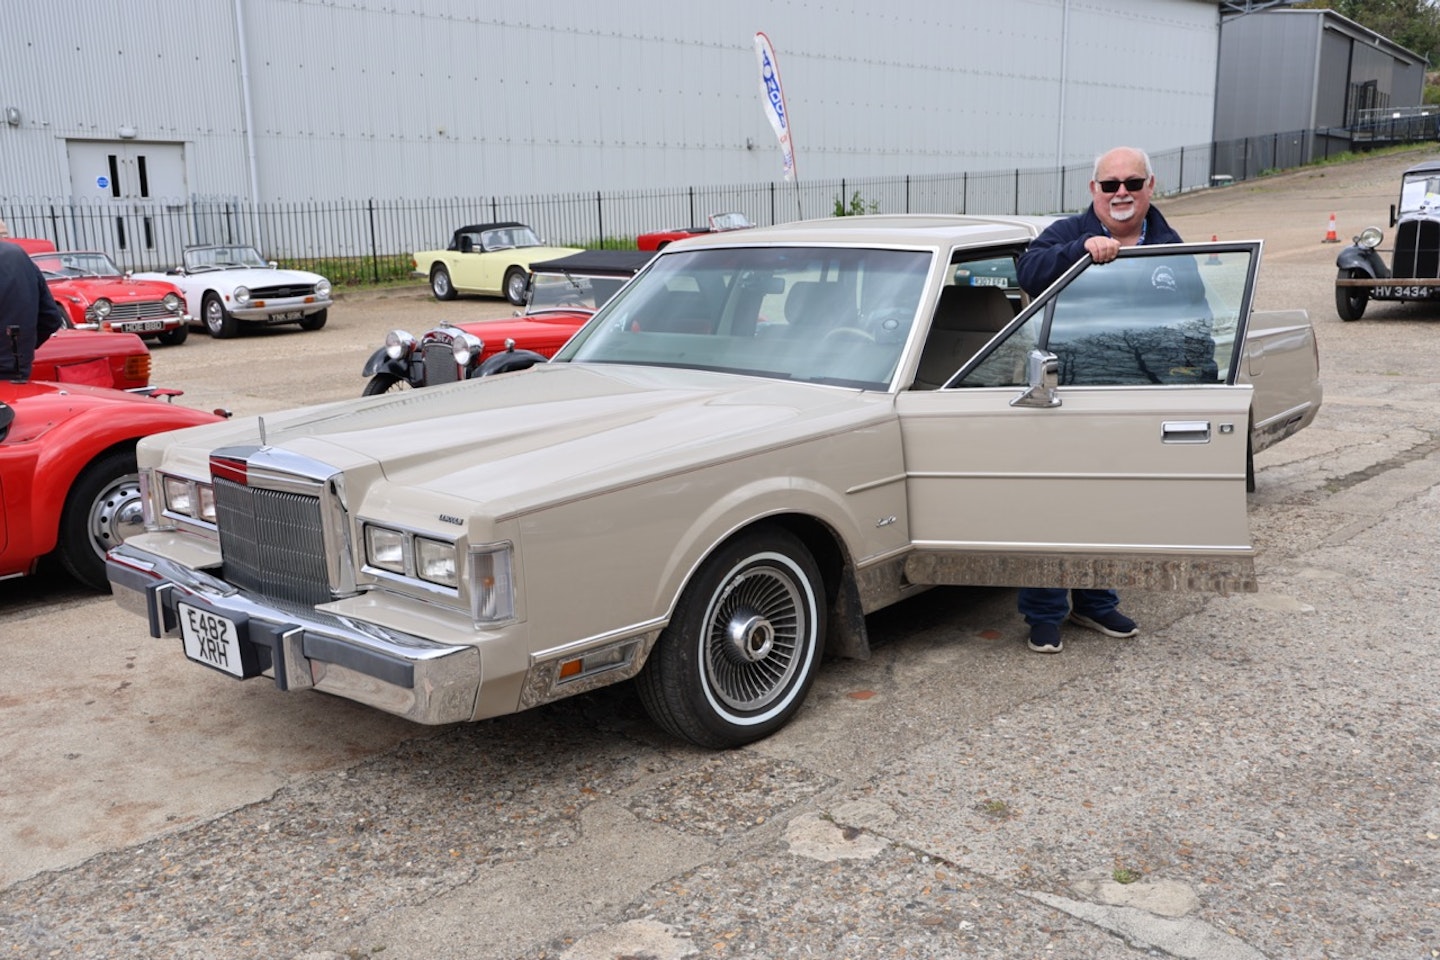 ‘I like its brashness,’ said Garry Taylor of Arundel about his 1988 Lincoln Town Car Signature Series, which he only bought four weeks before this event.